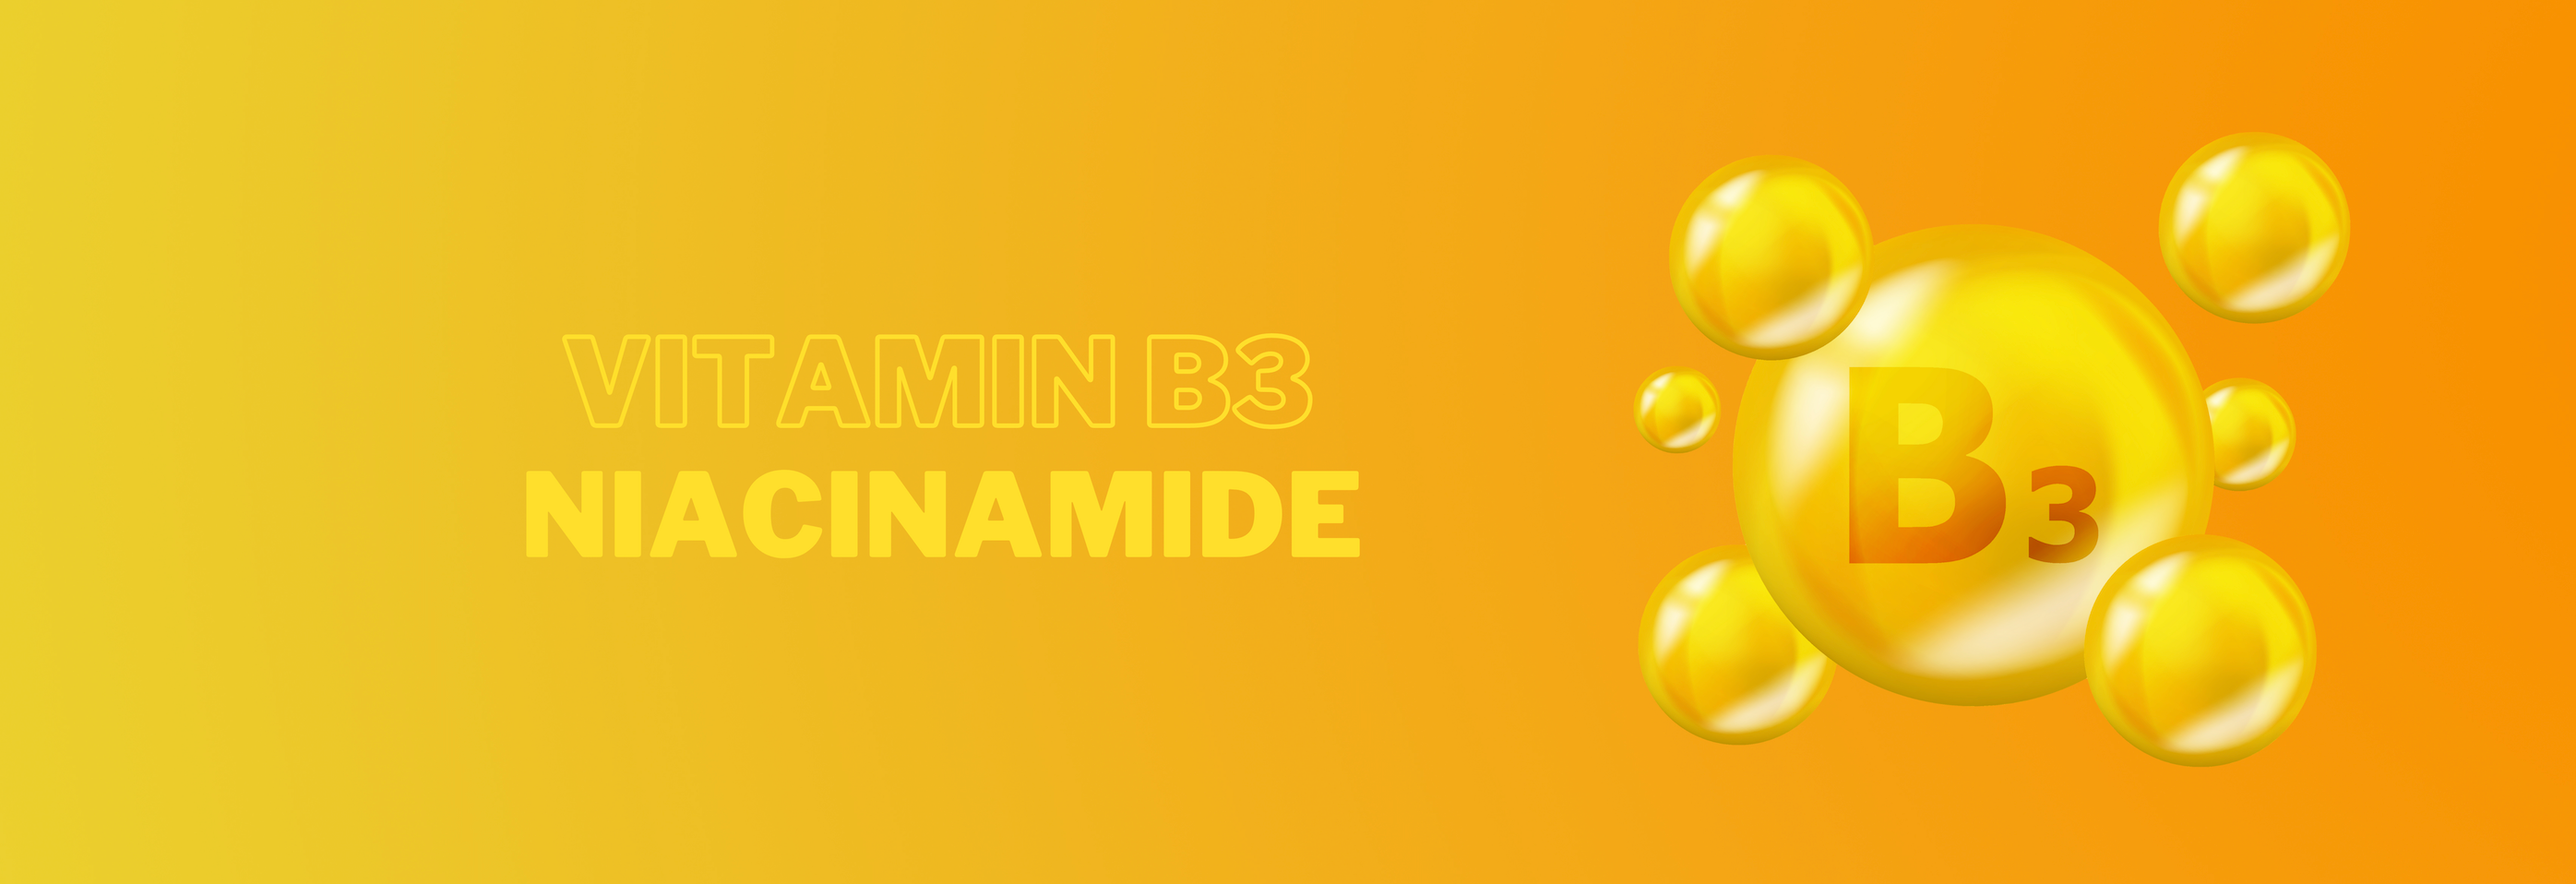 What are the skin benefits of niacinamide?